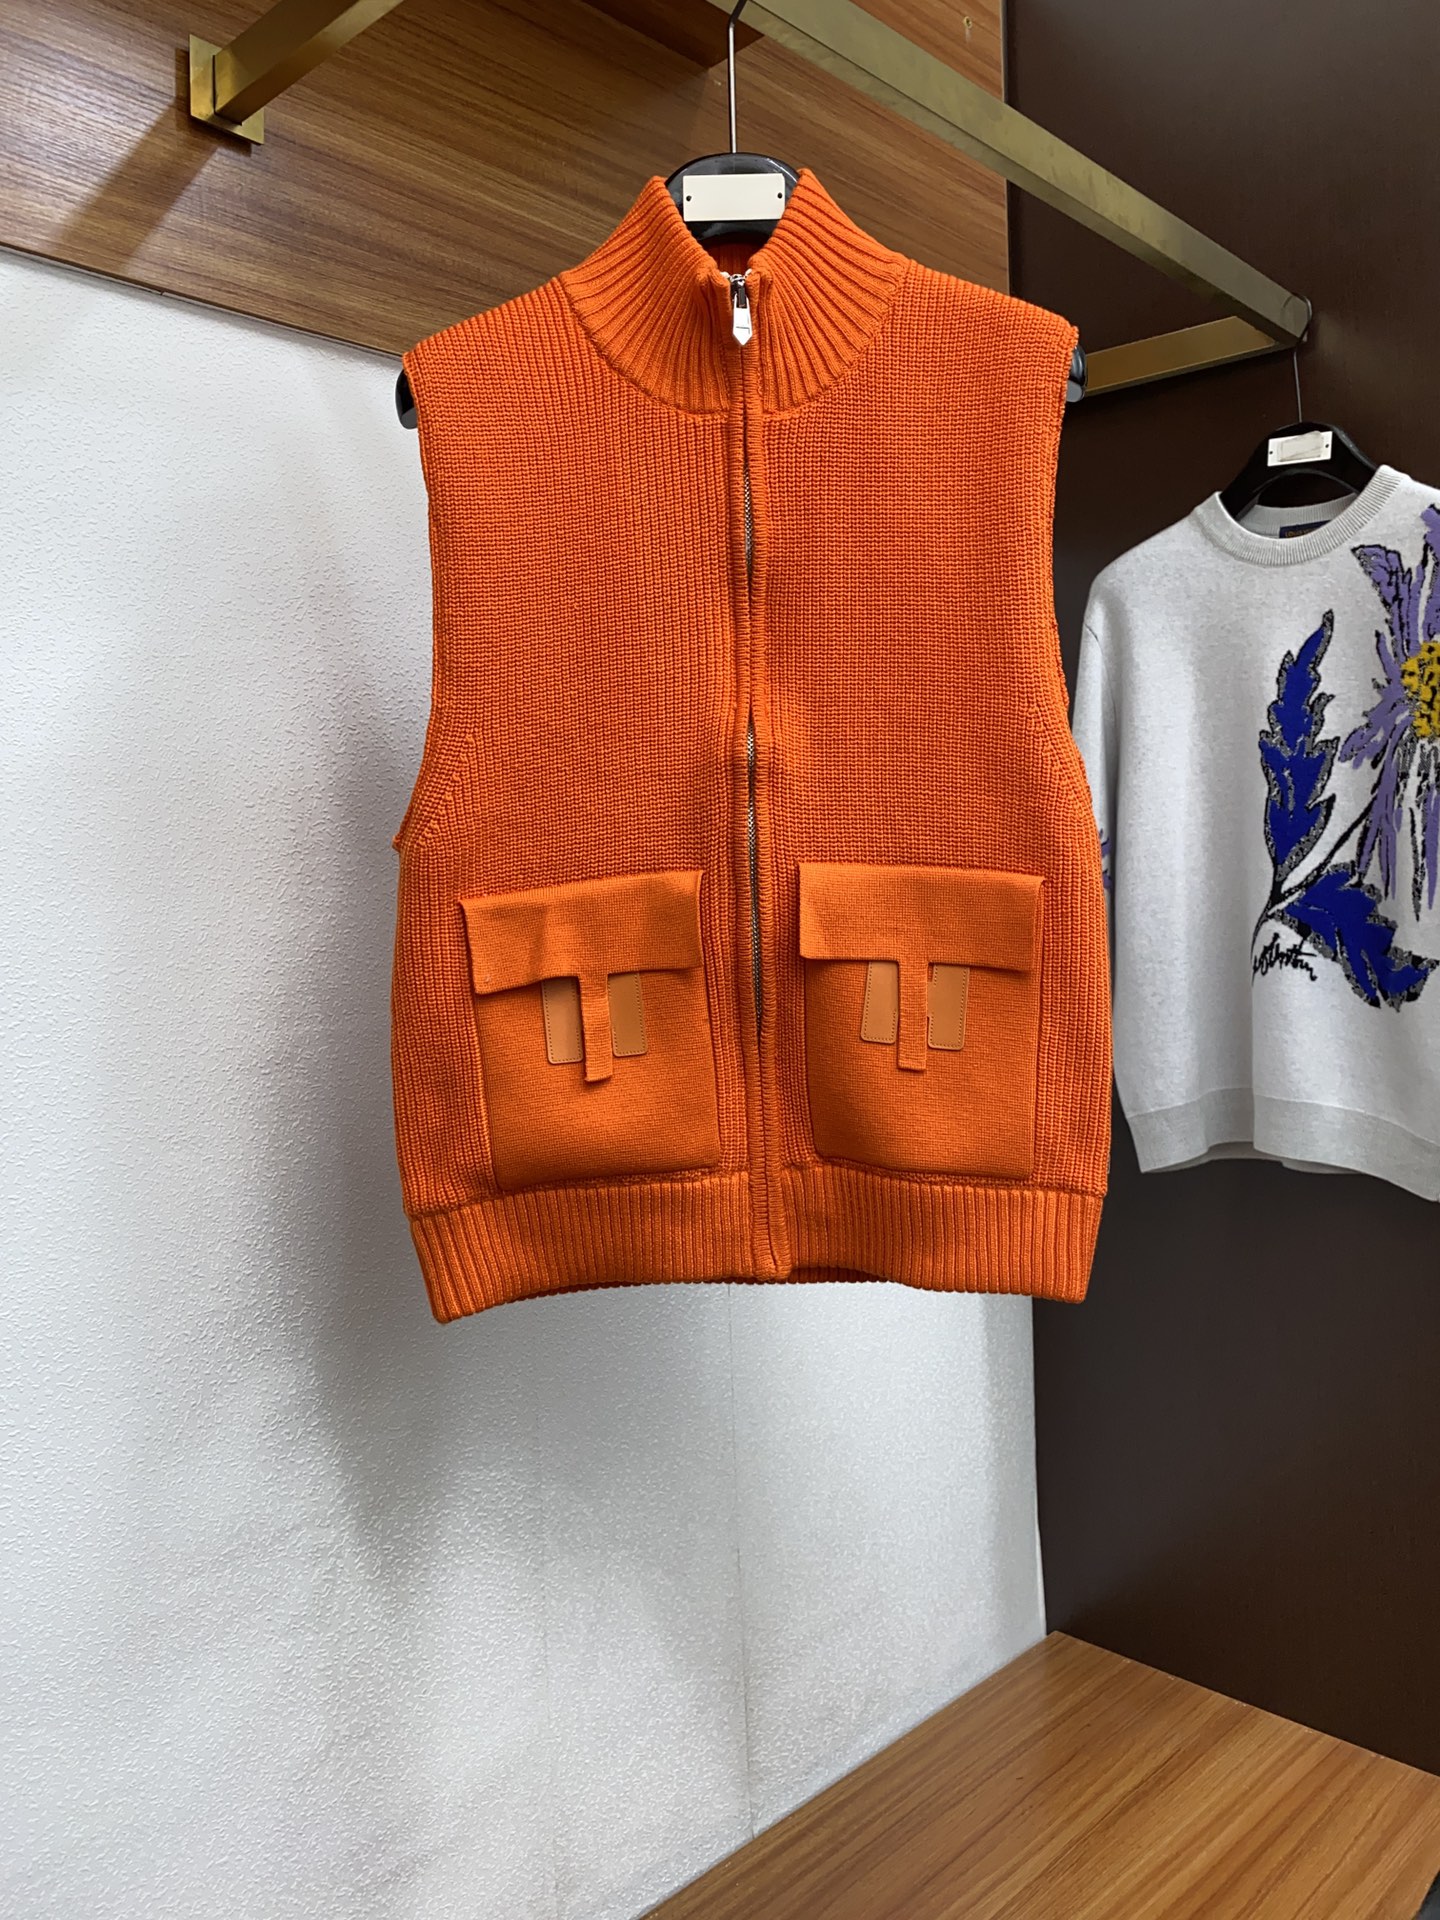 Hermes Clothing Waistcoats Embroidery Cashmere Knitting Wool Fall/Winter Collection